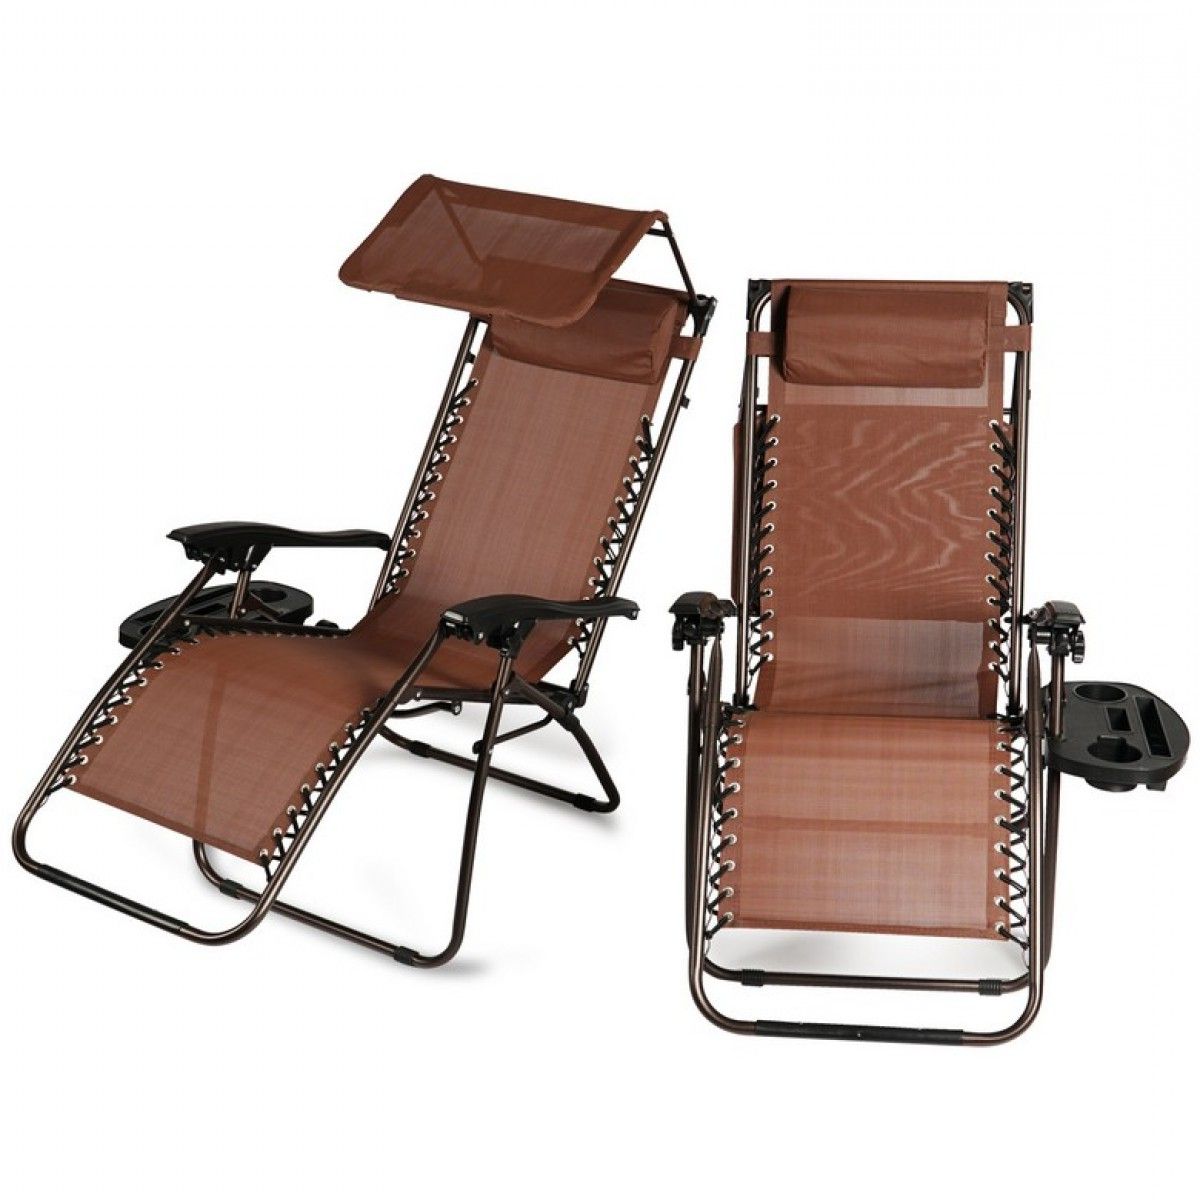 Belleze 2 Pack Zero Gravity Chair W/ Canopy Top Reclining Lounge Chairs  Outdoor Patio W/ Cup Holder, Brown For Recent Garden Oversized Chairs With Sunshade And Drink Tray (View 9 of 25)